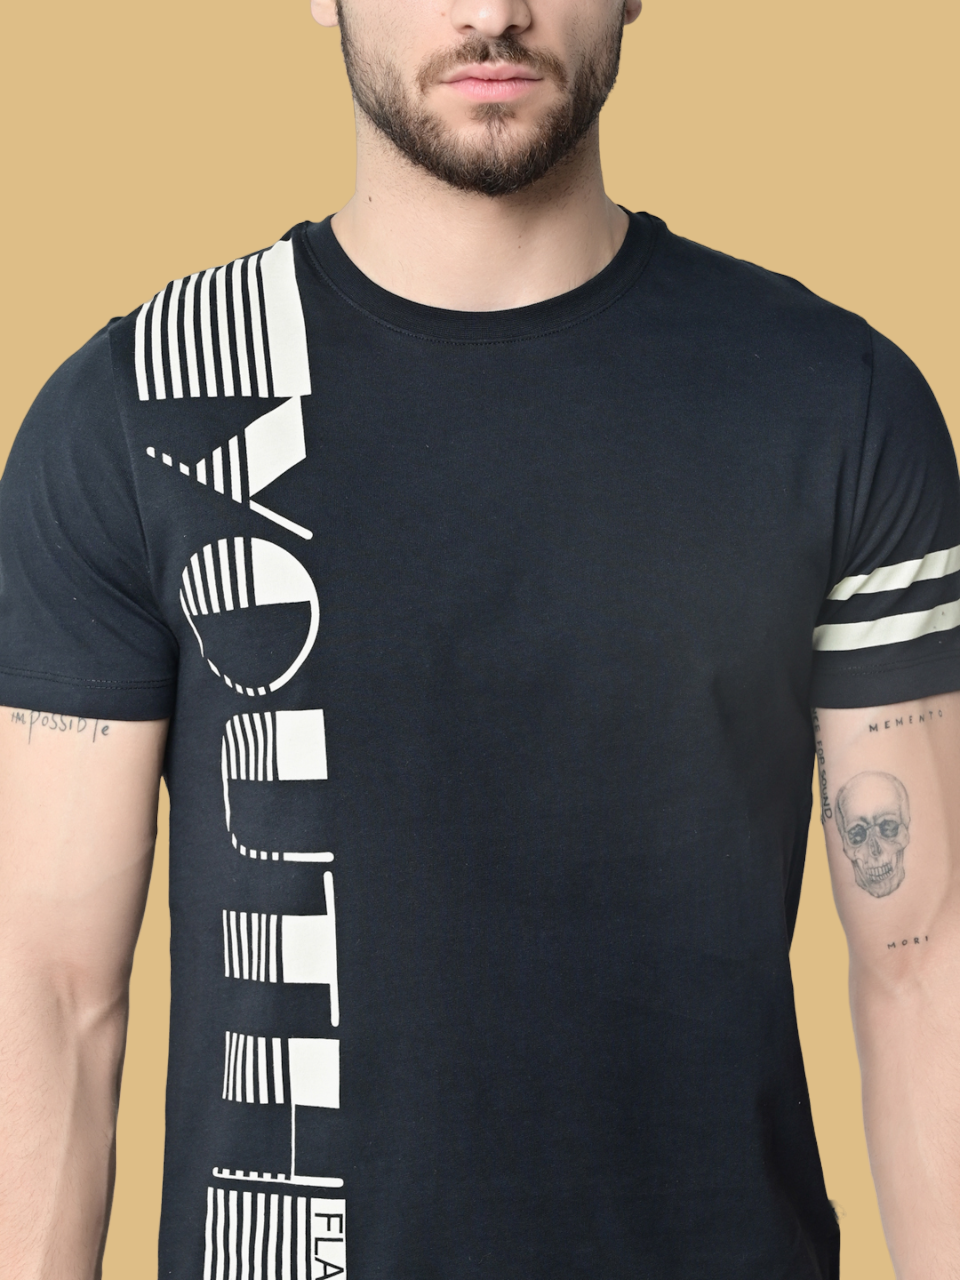 Flawless Men's Classic Black Cotton T-Shirt Being Flawless